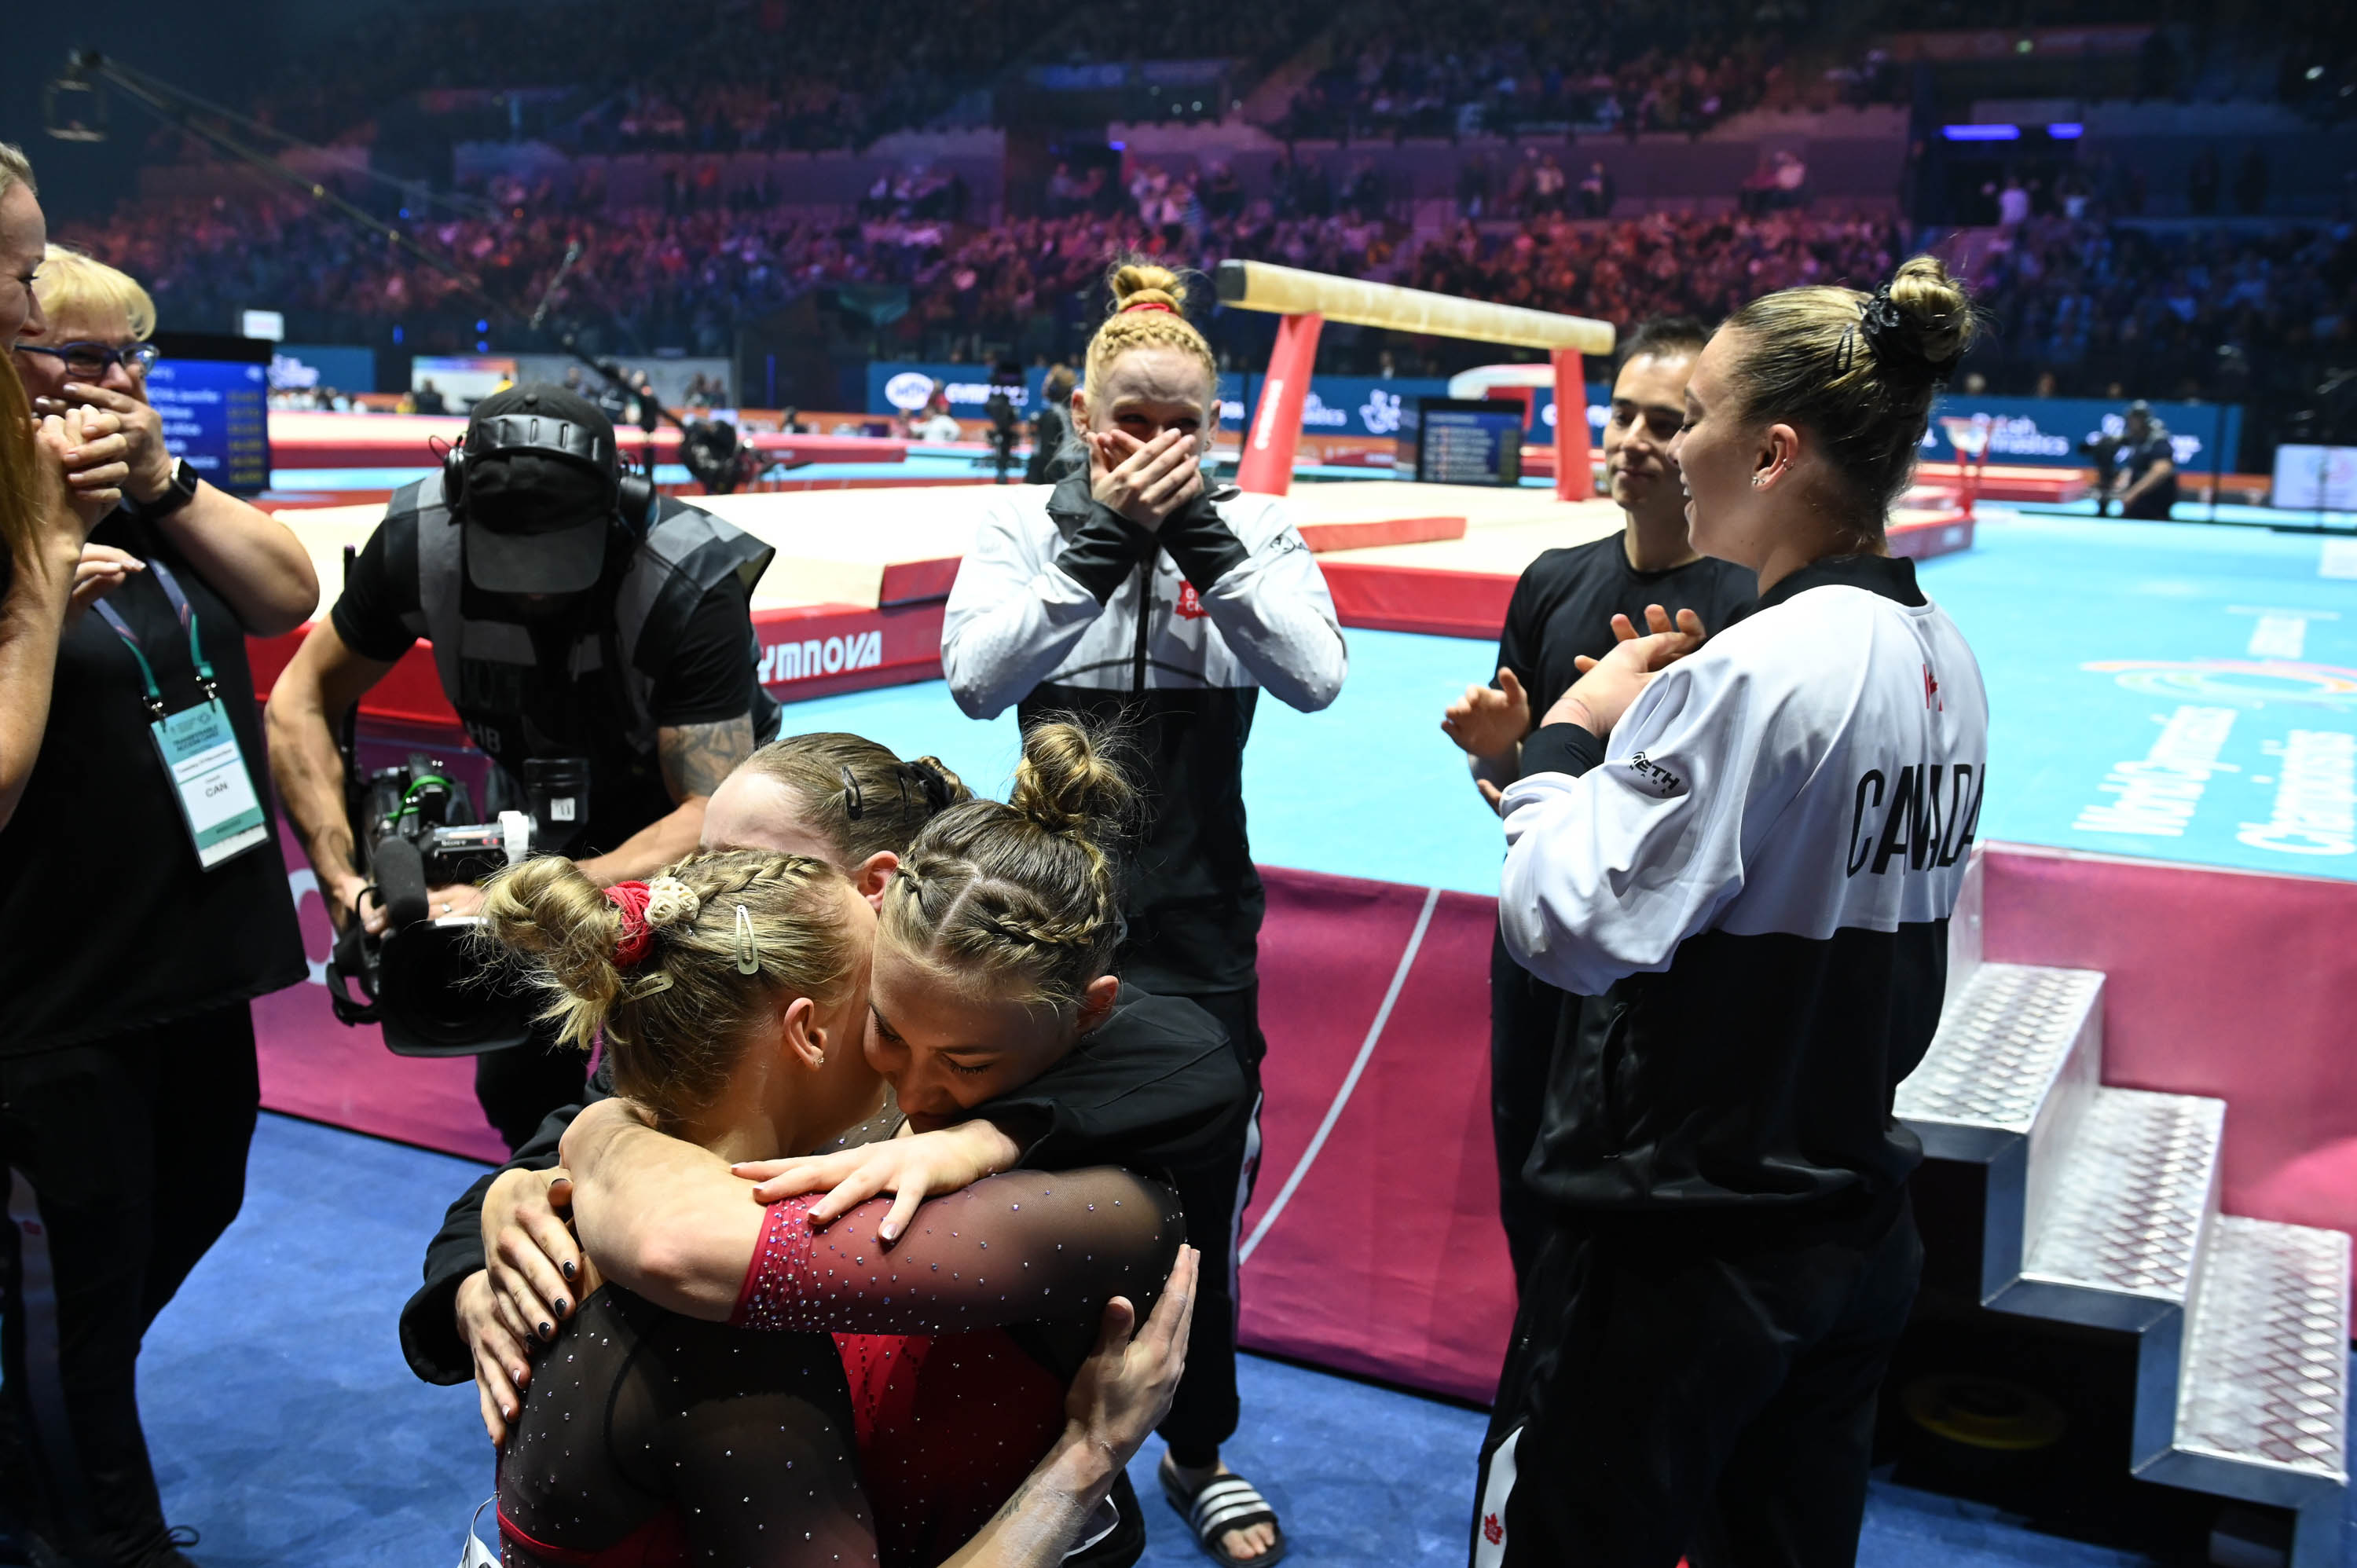 Three gymnasts hug each other on the floor while two others watch in tearful joy